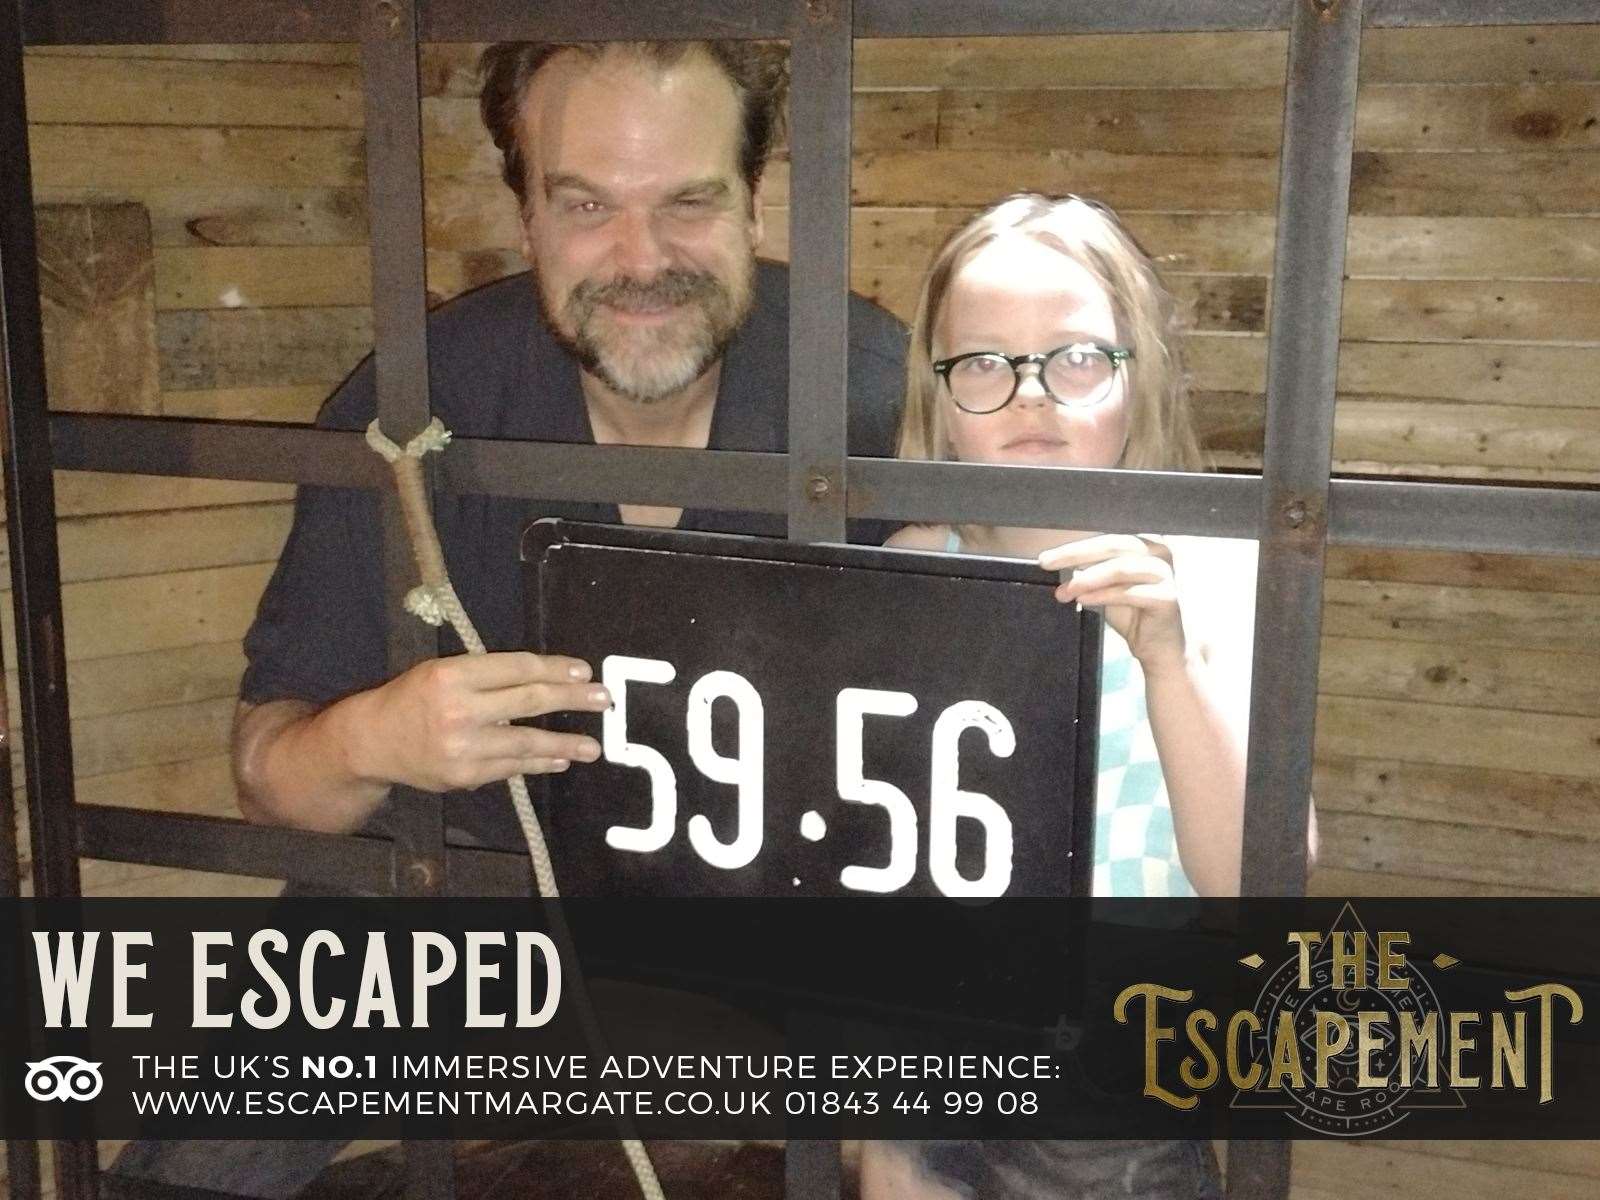 The Stranger Things star completed his escape from an escape room. Picture: The Escapement - Margate Escape Rooms